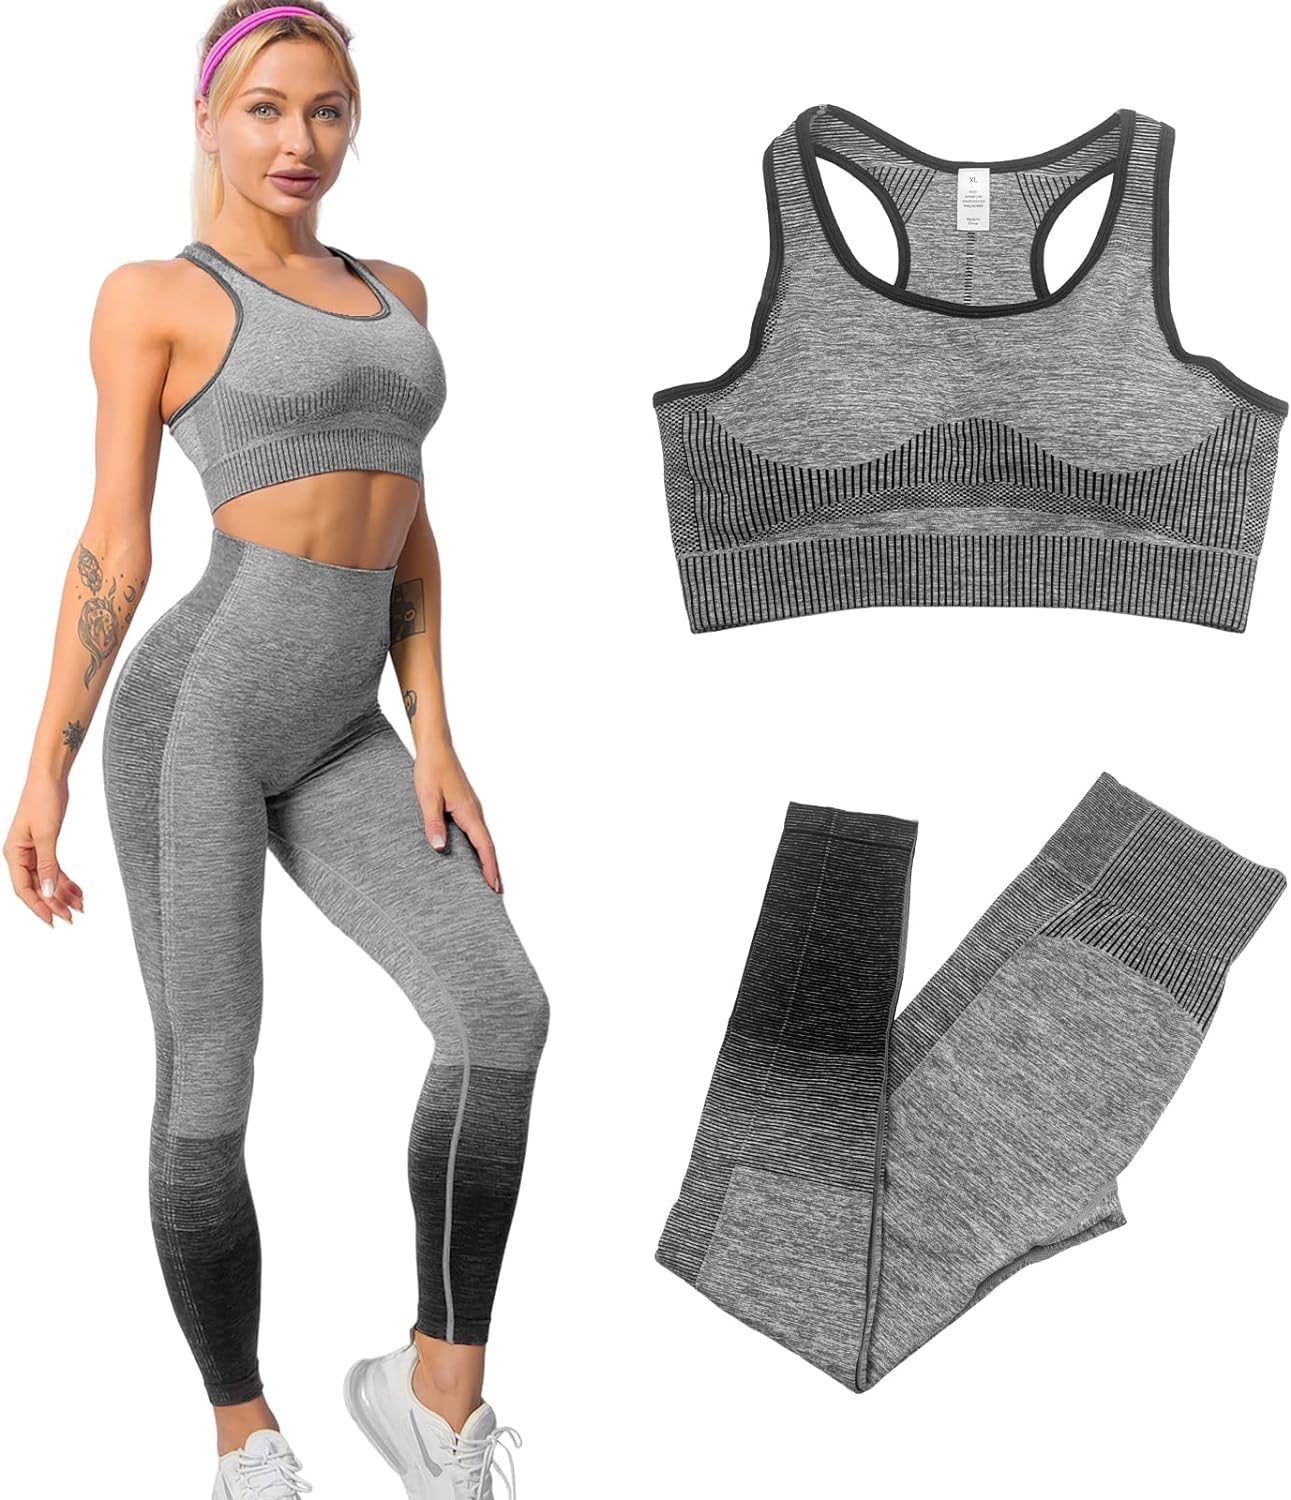 Women'S 3Pcs Seamless Workout Outfits Sets, Yoga Sportswear Tracksuit Leggings and Stretch Sports Bra Fitness